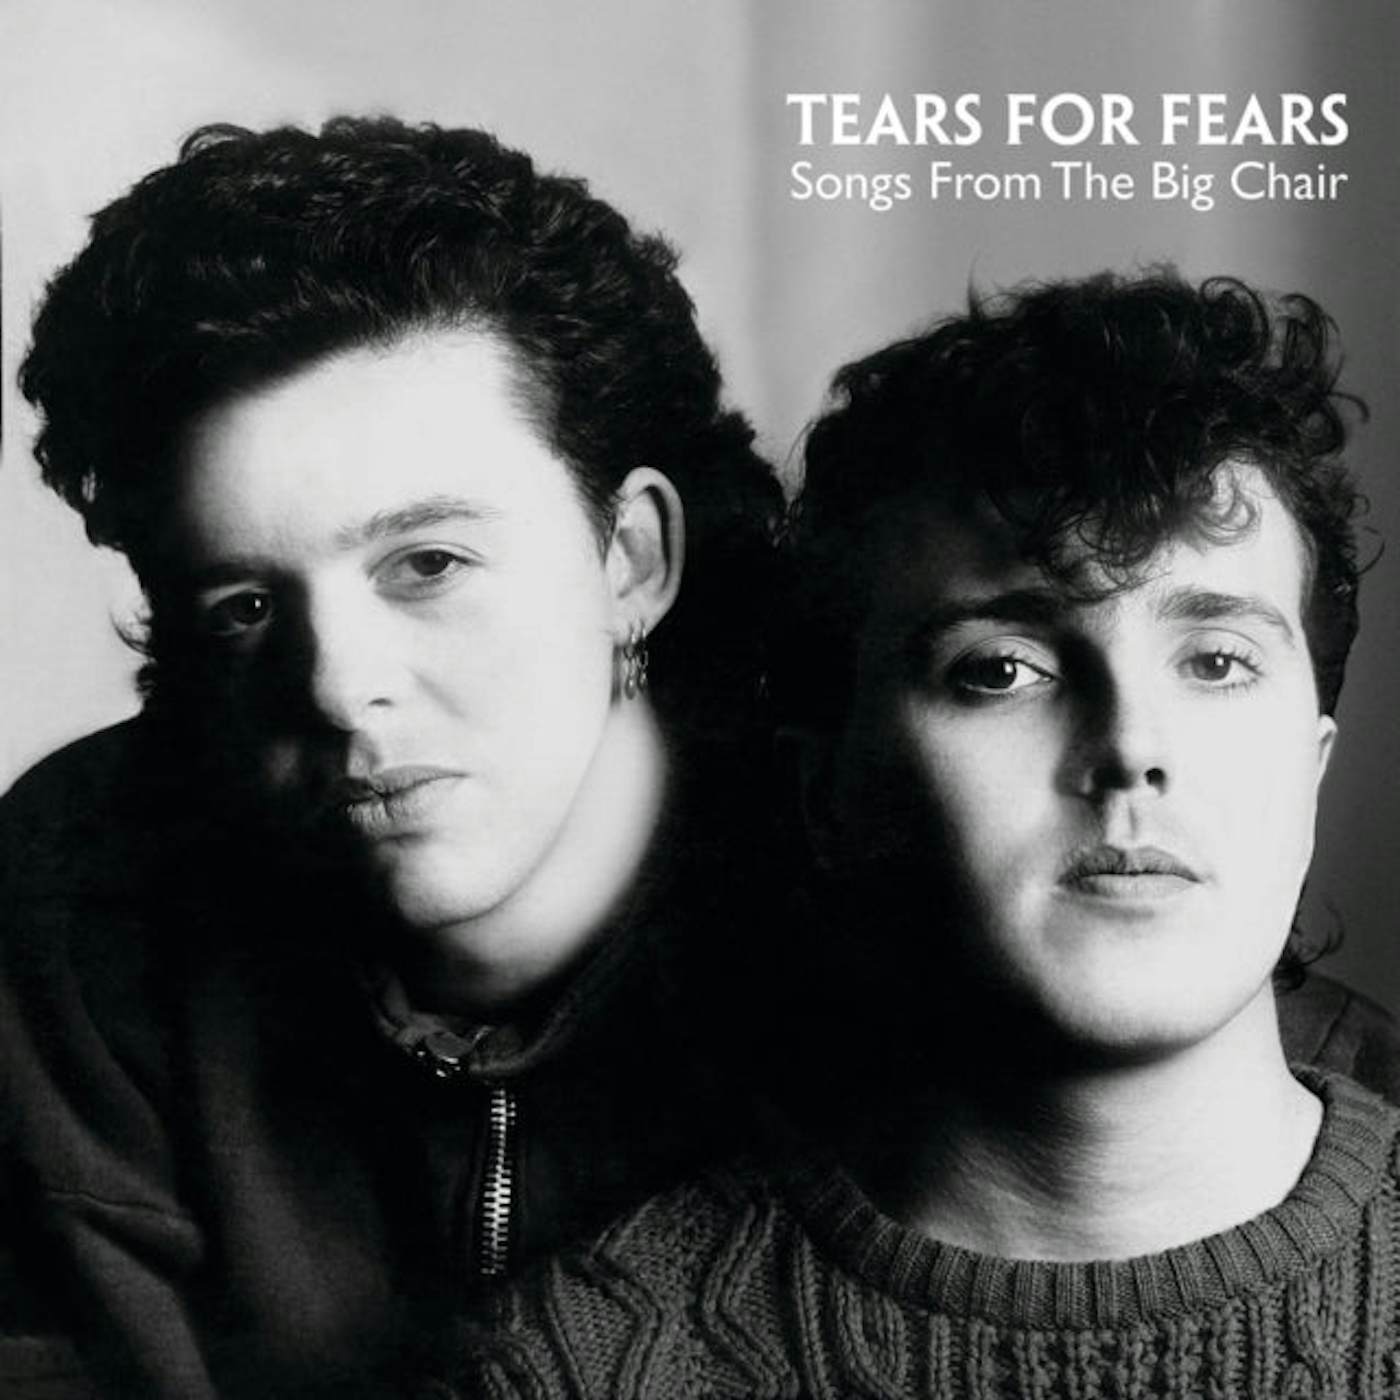 Tears For Fears LP Vinyl Record - Songs From The Big Chair